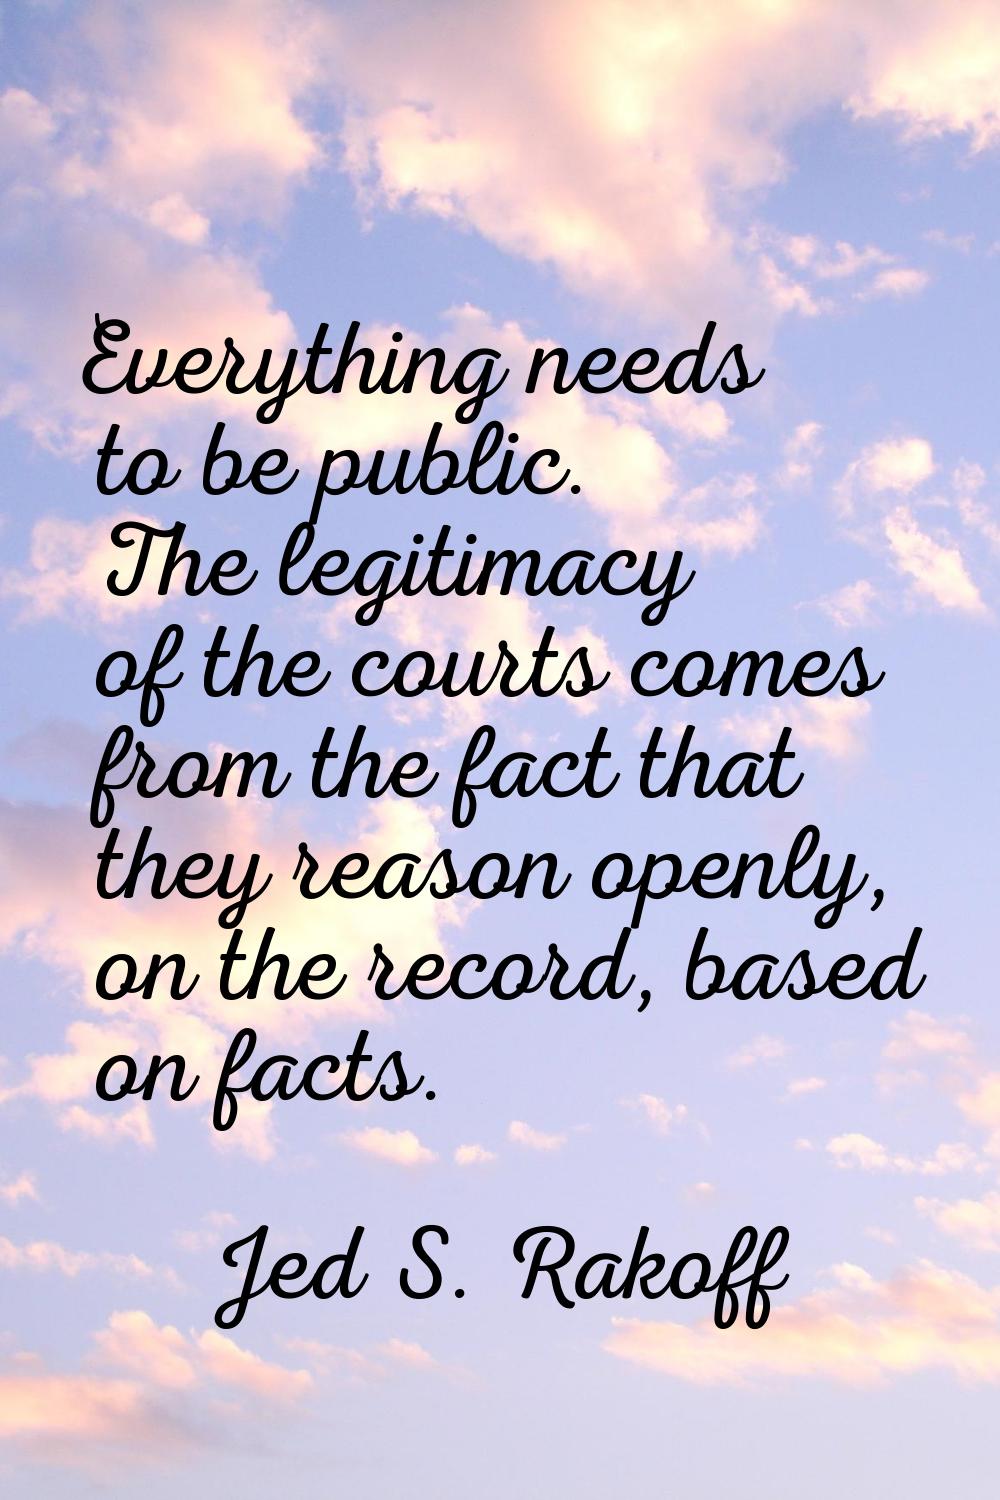 Everything needs to be public. The legitimacy of the courts comes from the fact that they reason op